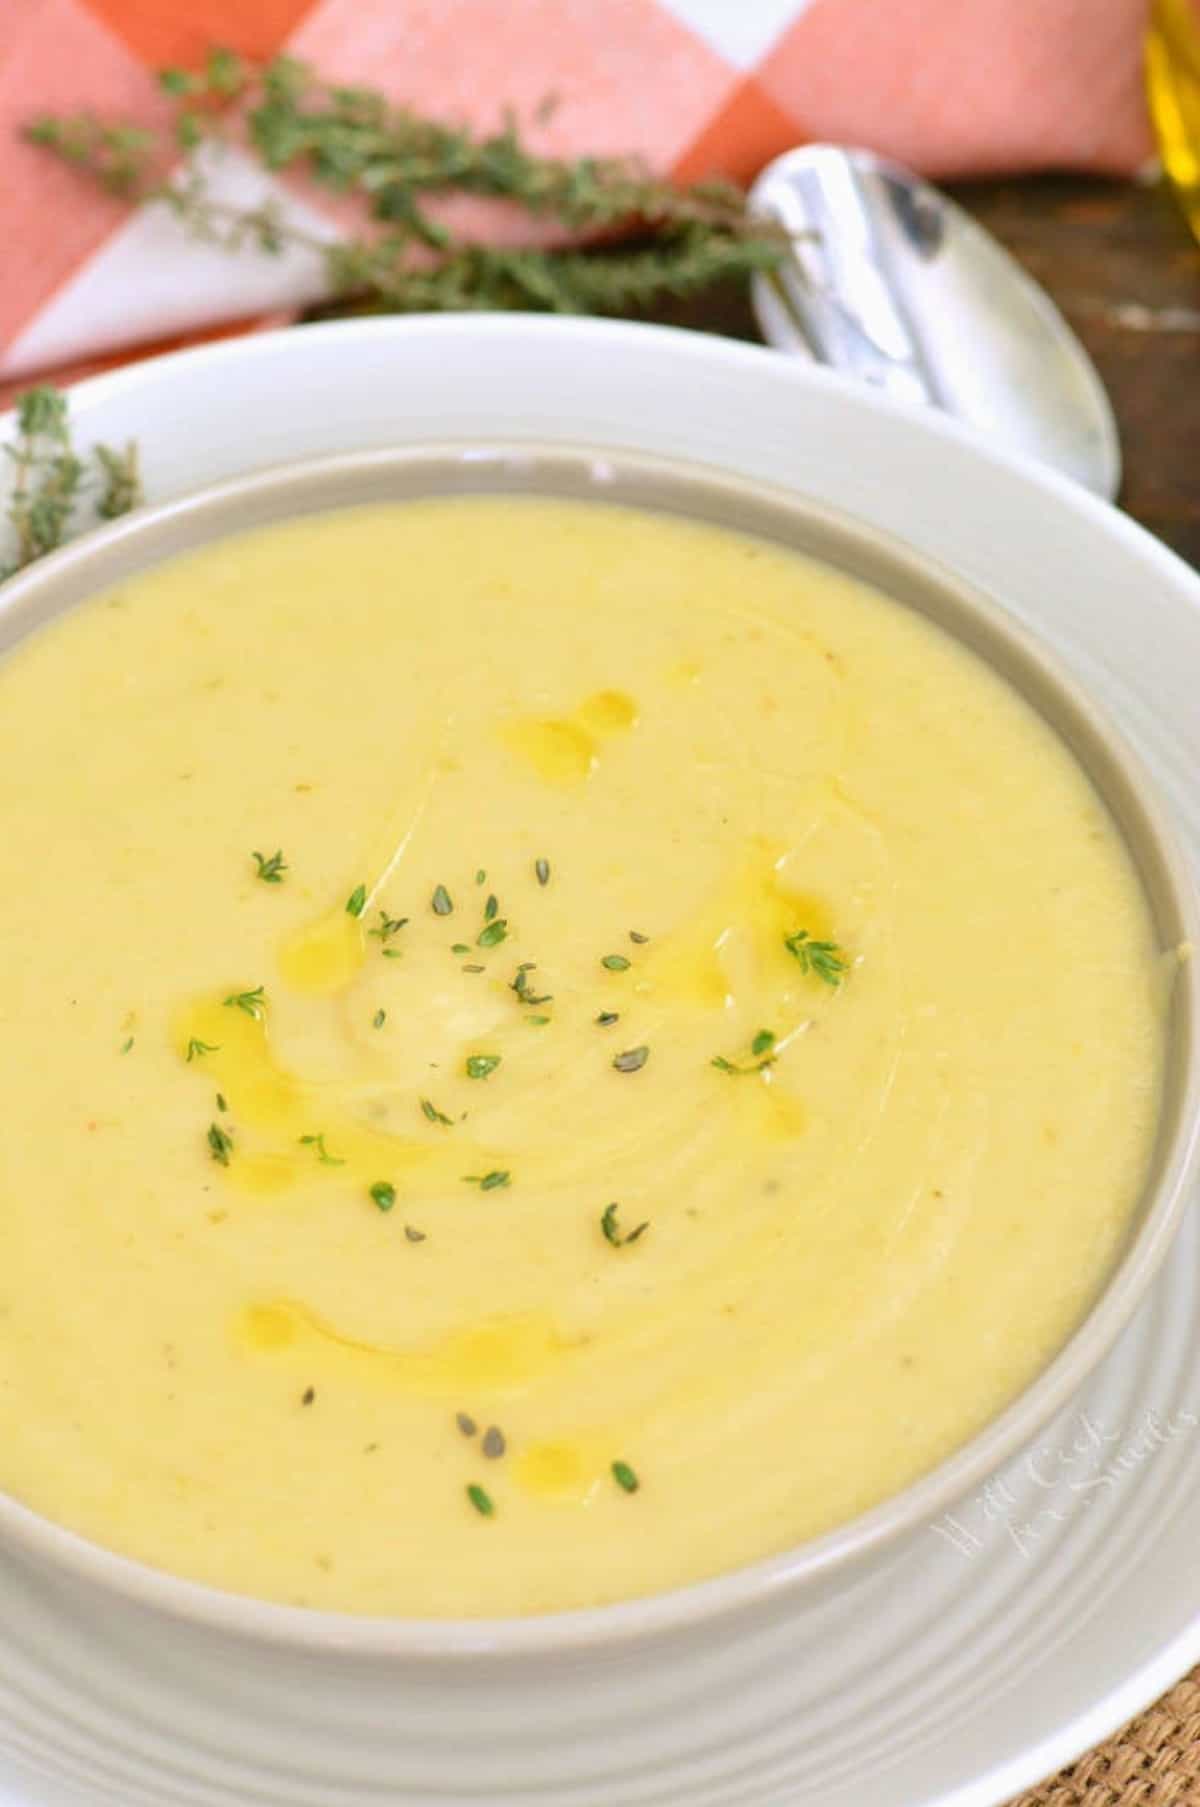 Potato leek soup in a bowl on top of a plate with rosemary sprinkled on top as garnish.